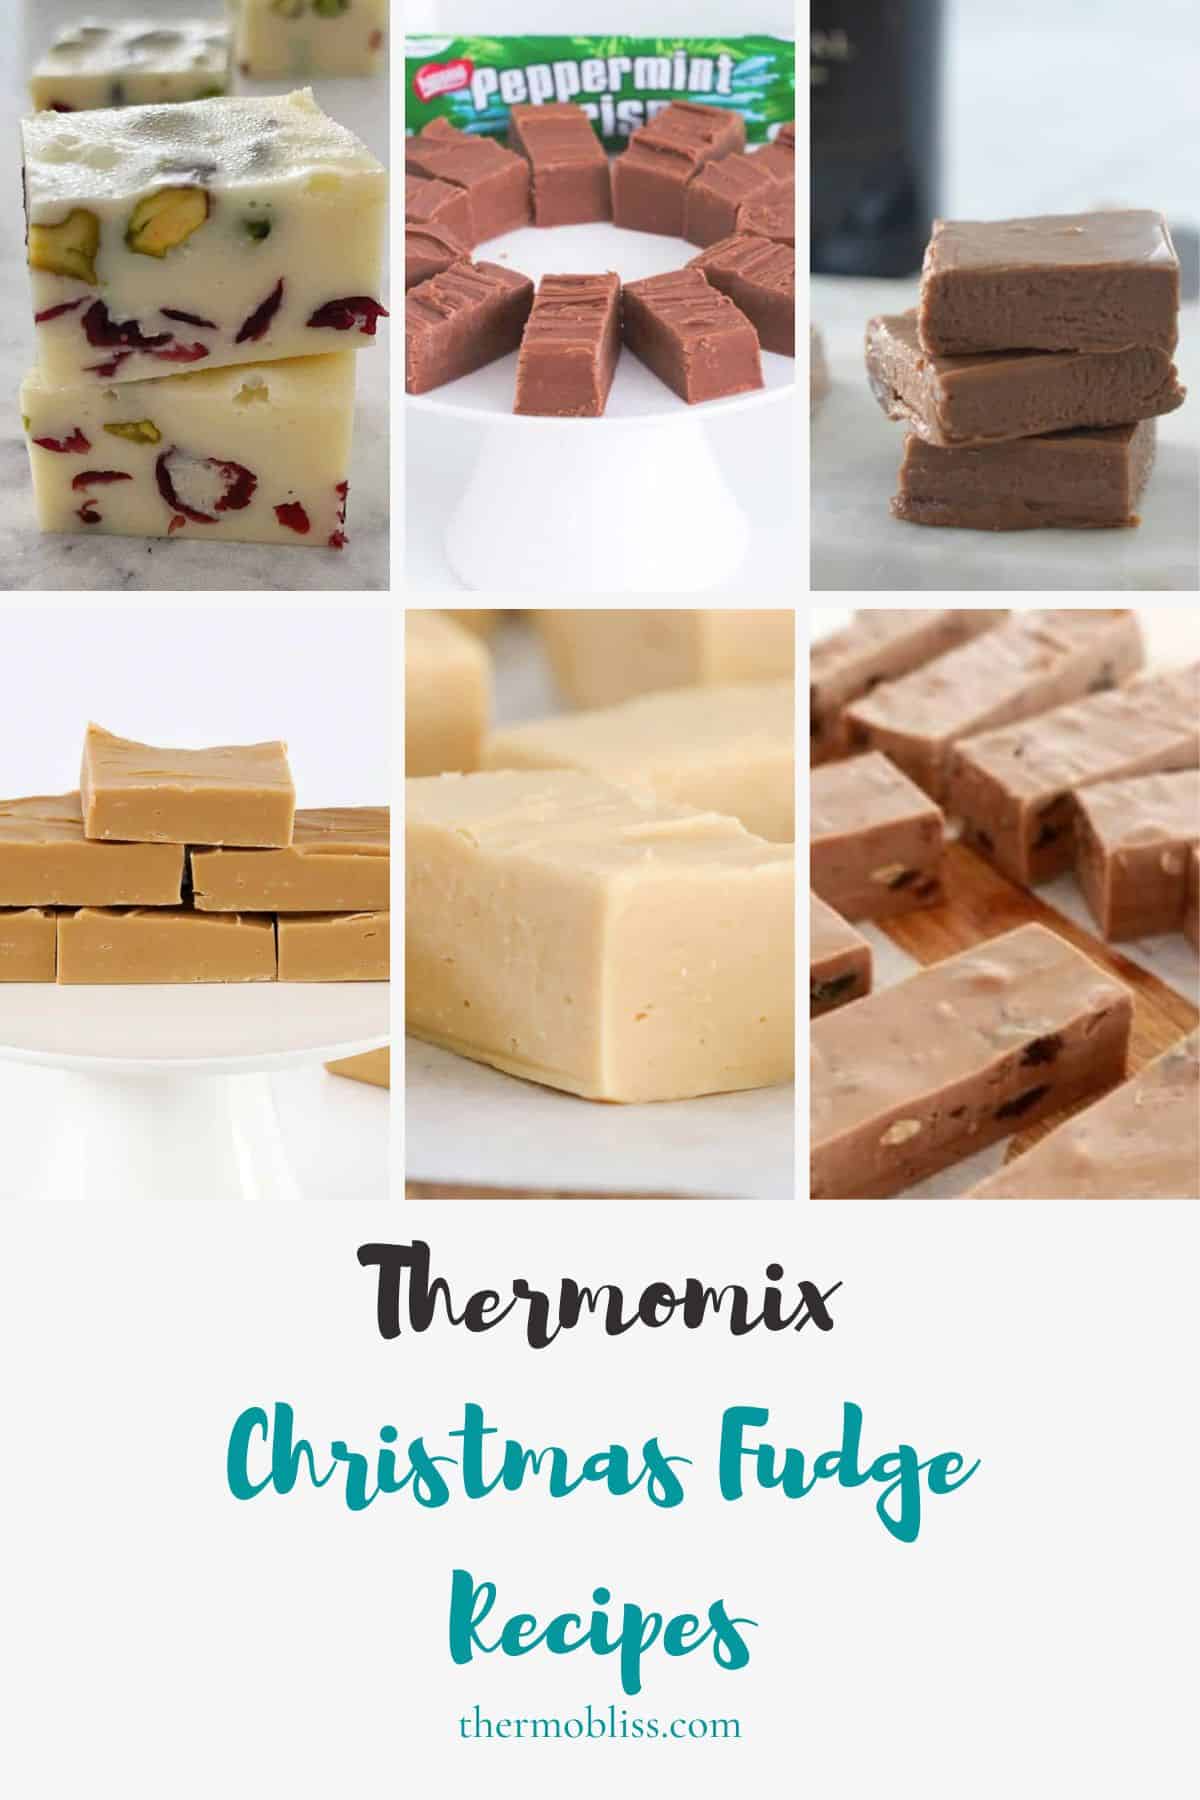 Collage of Thermomix Christmas Fudge images.